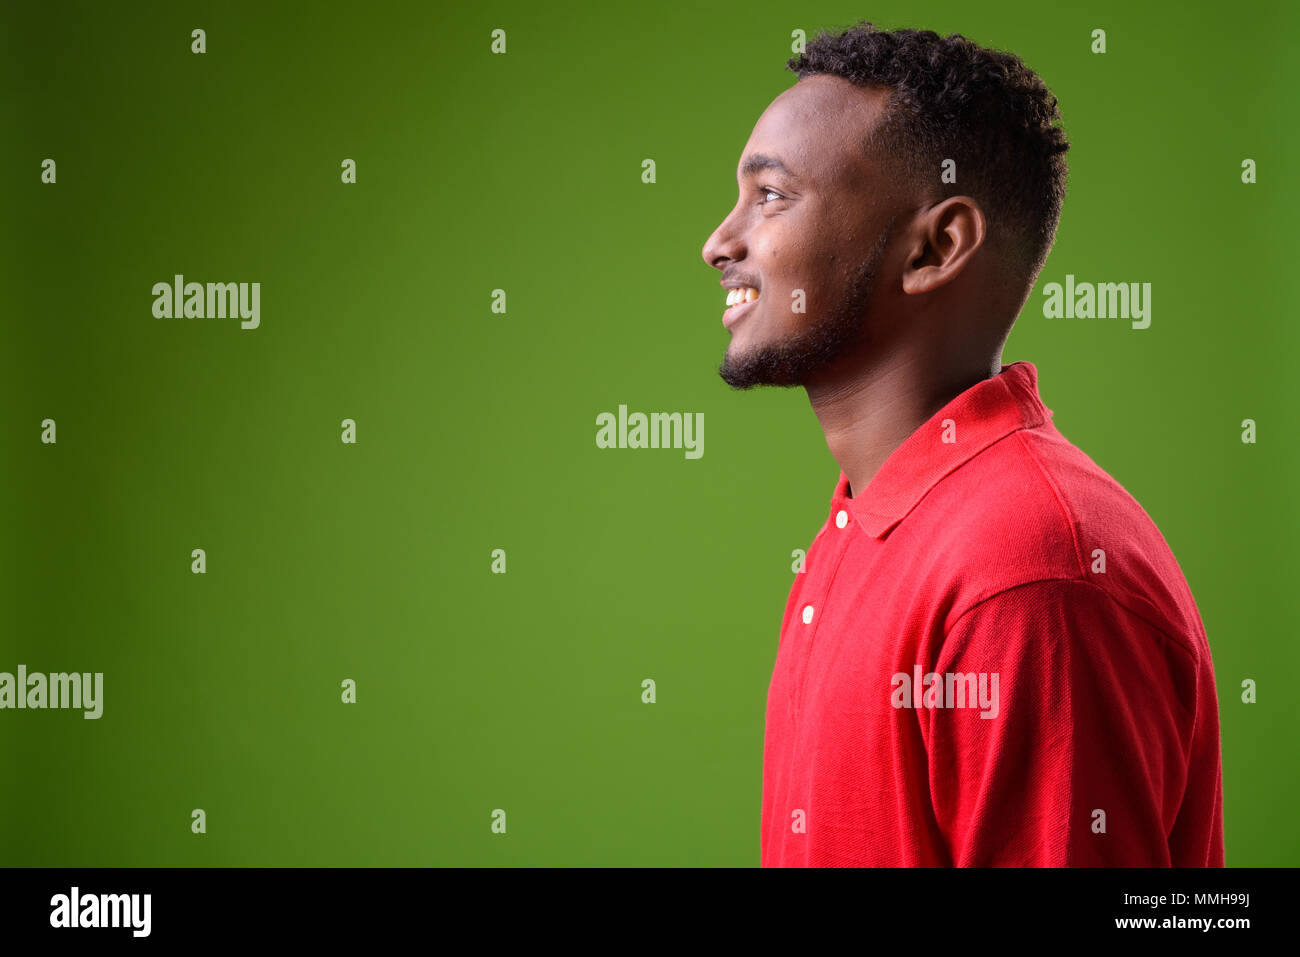 Young handsome African man against green background Stock Photo